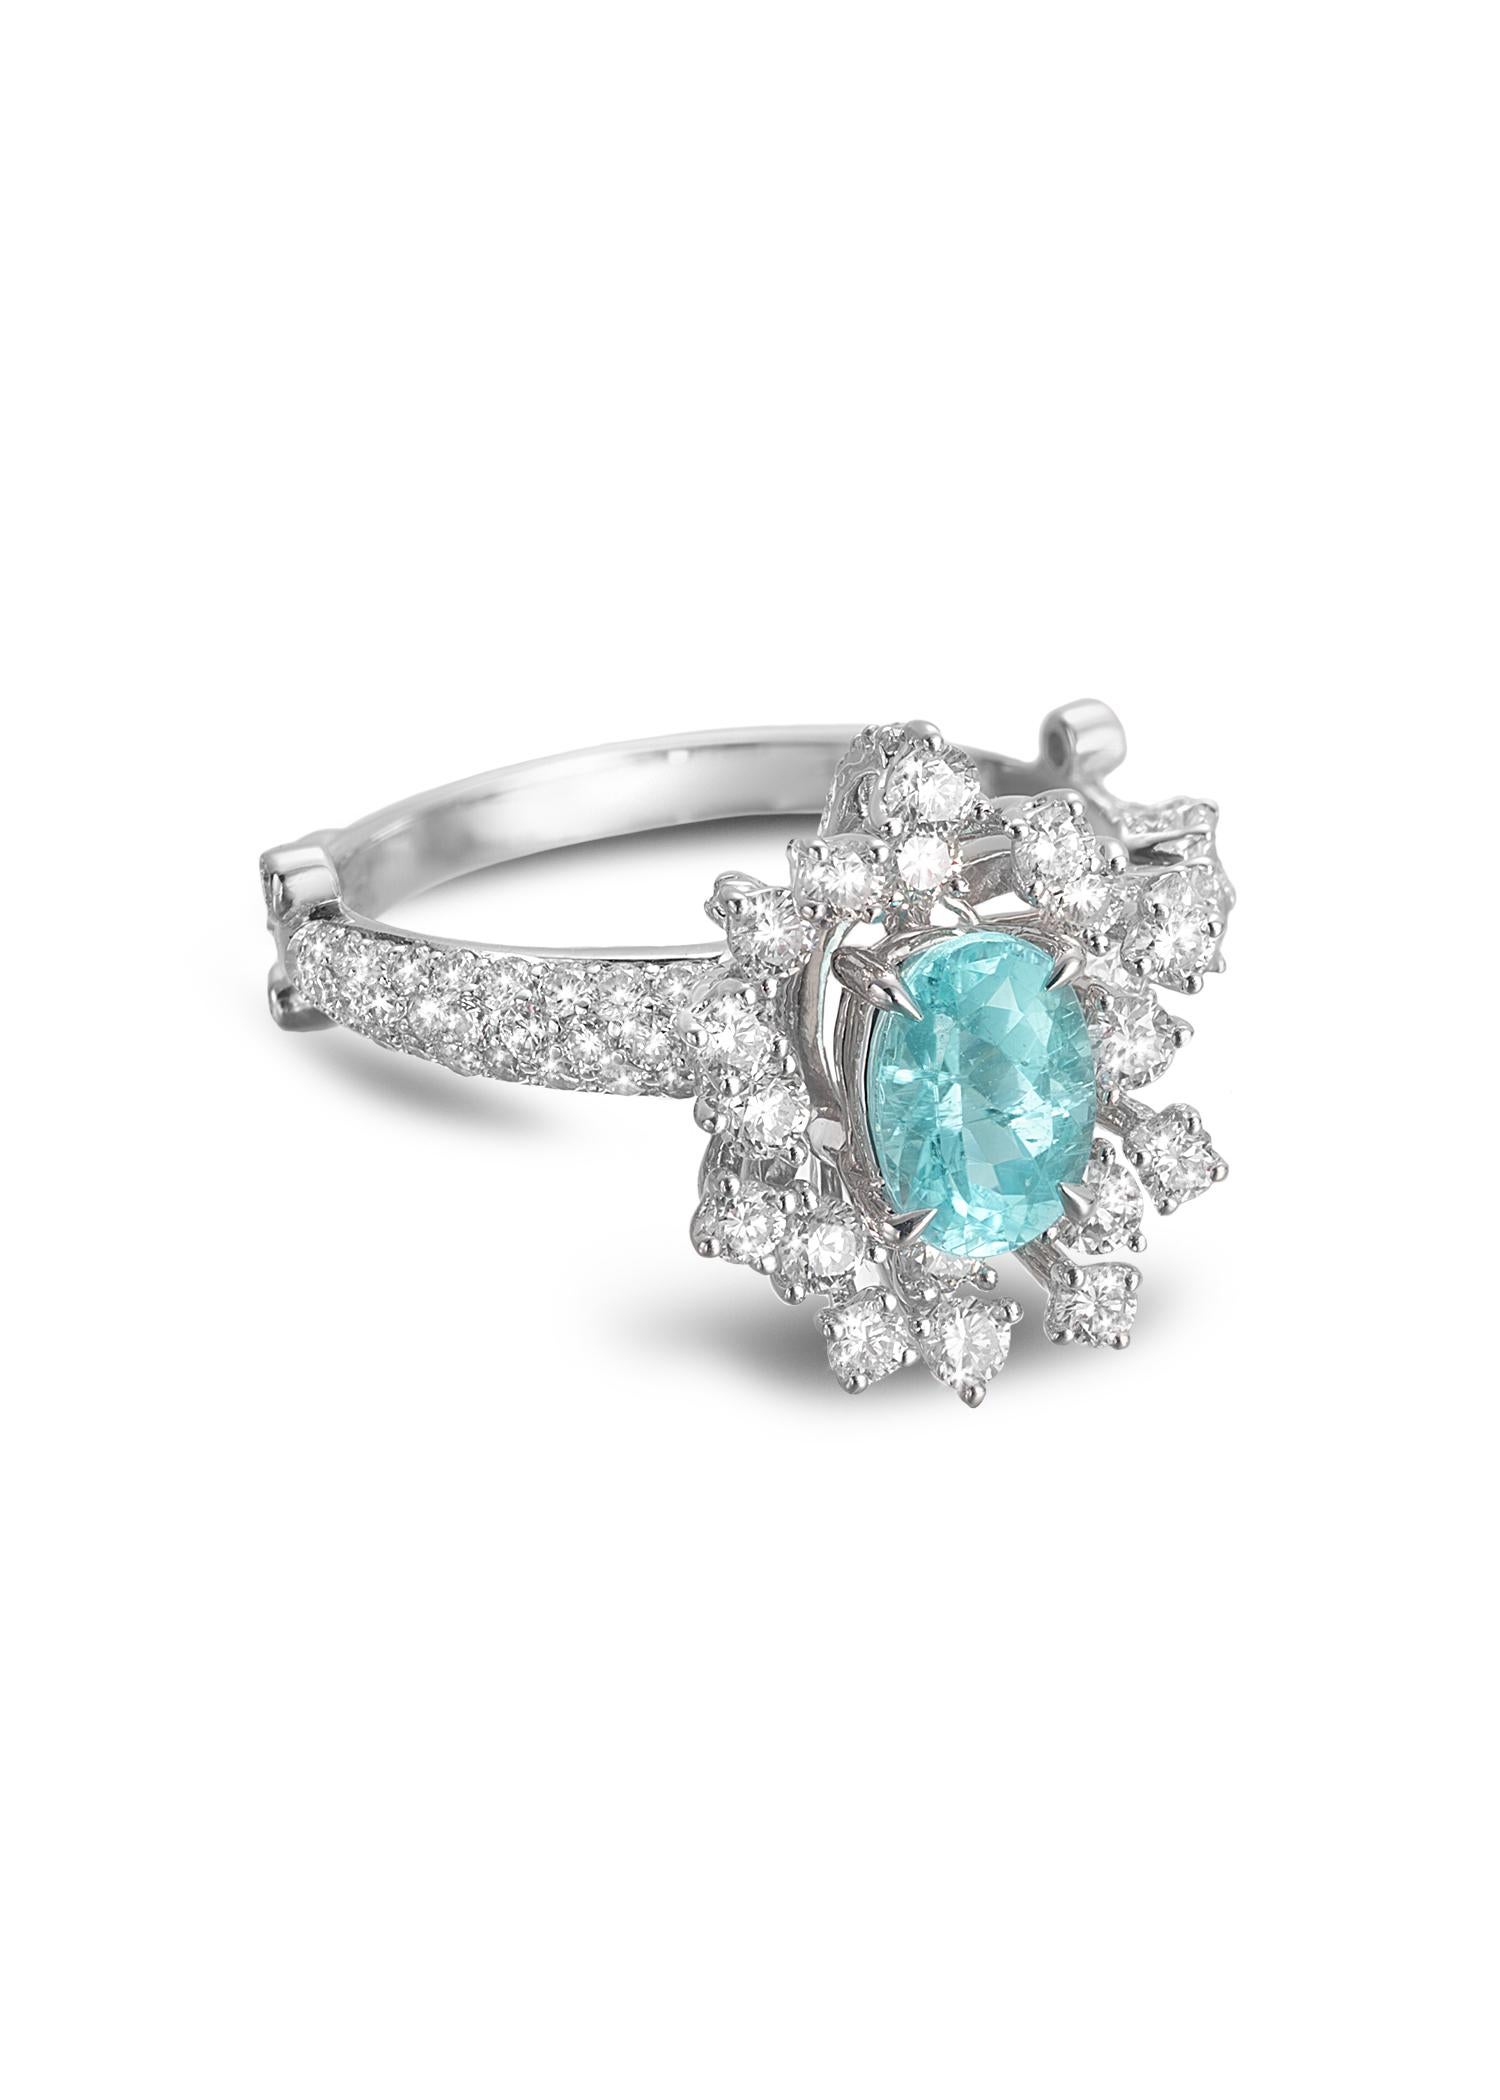 Trinity Collection, 18K White Gold with 1.32cts Diamonds and 0.830cts Oval Paraiba. 